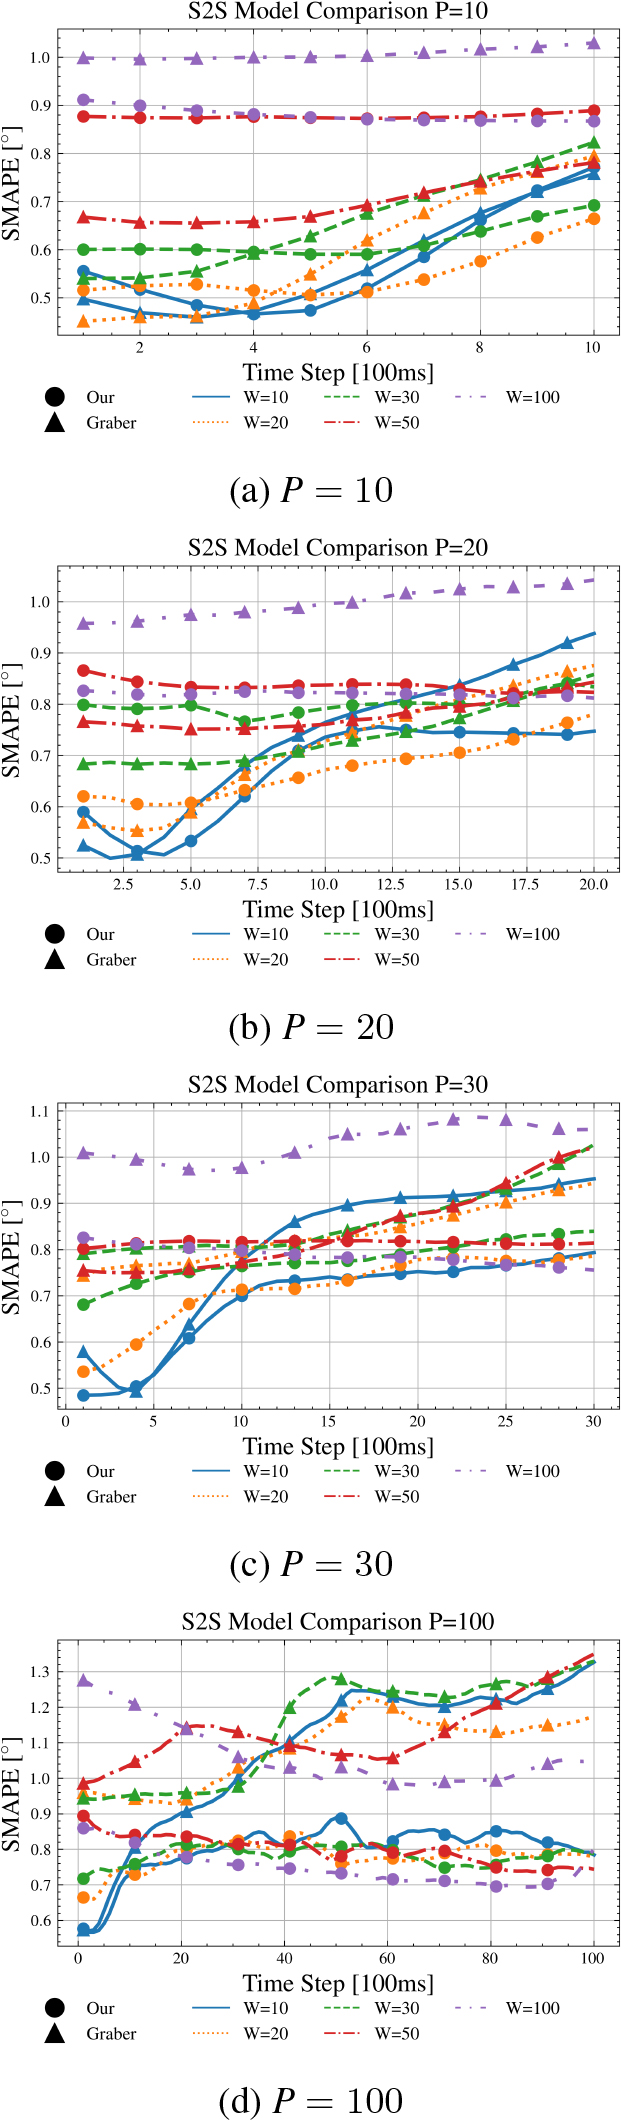 S2S averaged sMAPE comparison for Approach B for different horizons P.